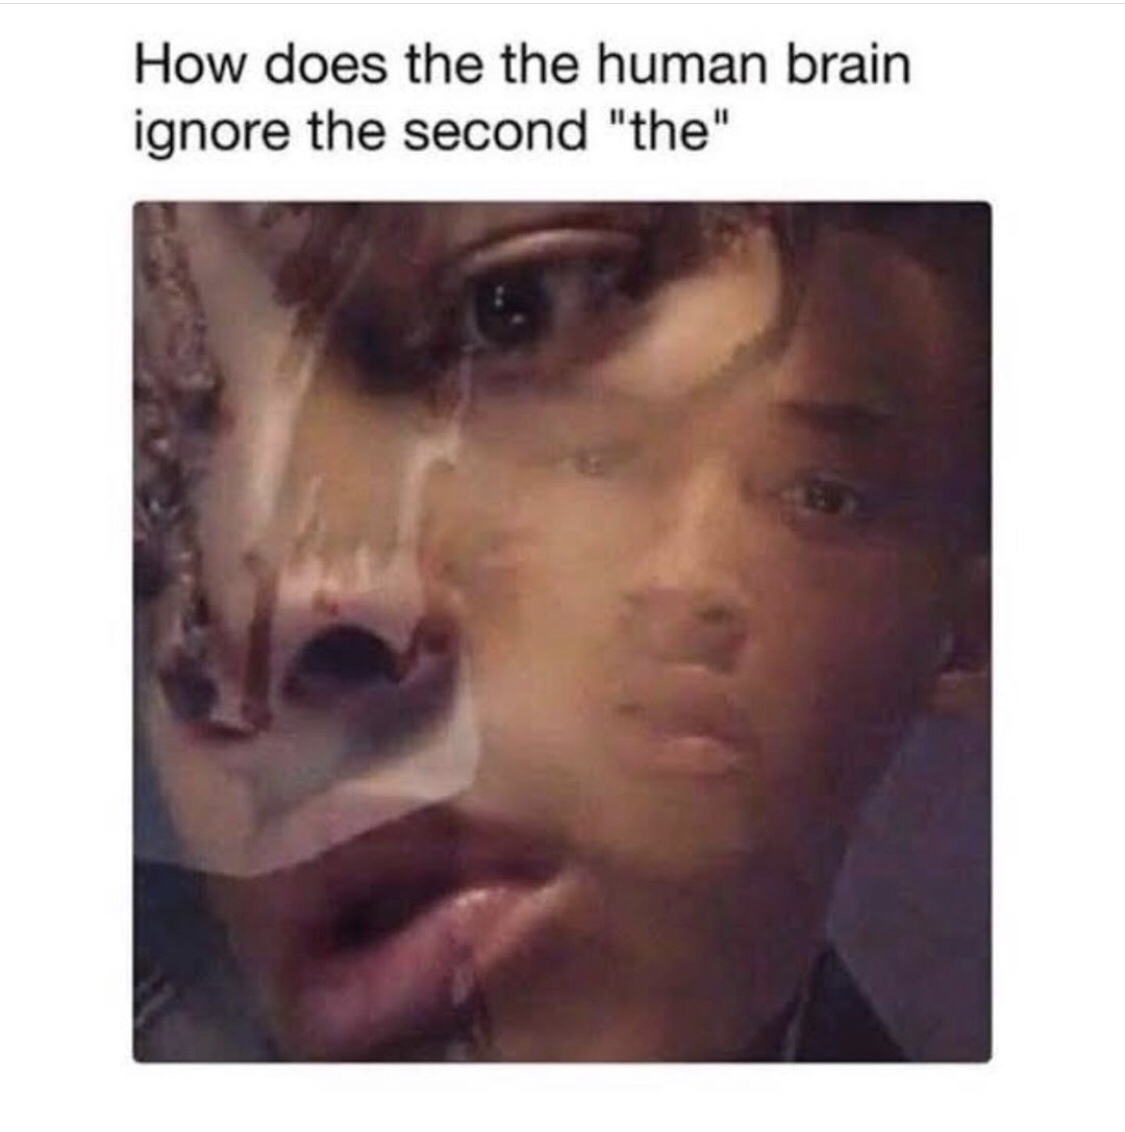 jaden smith meme - How does the the human brain ignore the second "the"